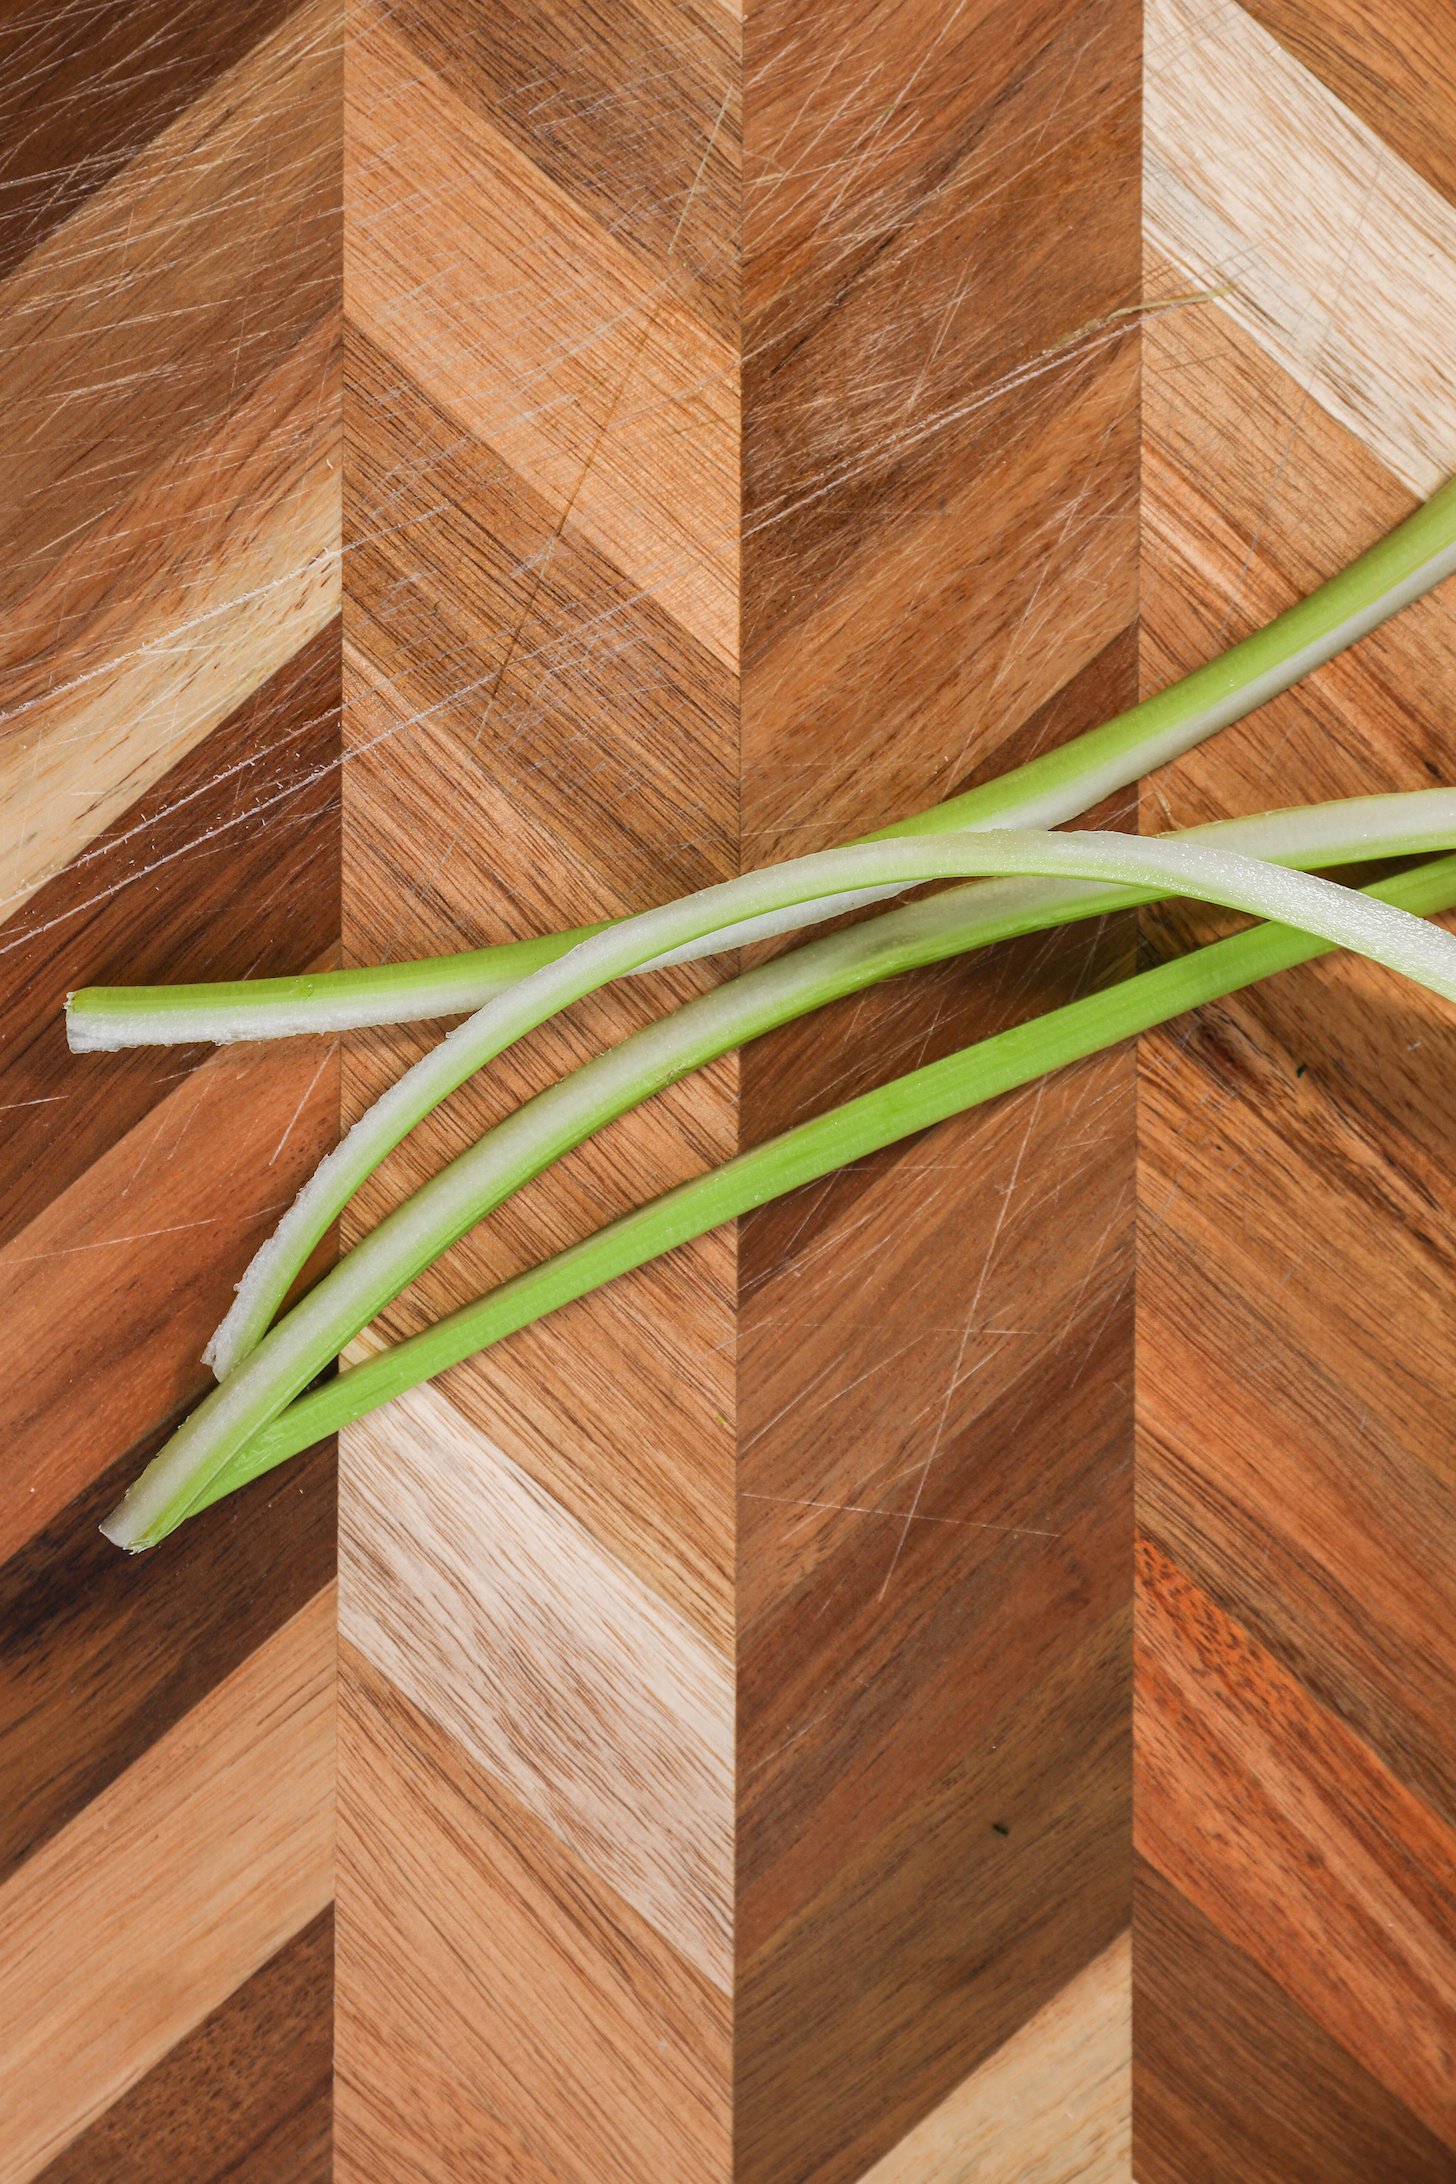 Four strips of celery piled on top of one another on a checkered wooden board.